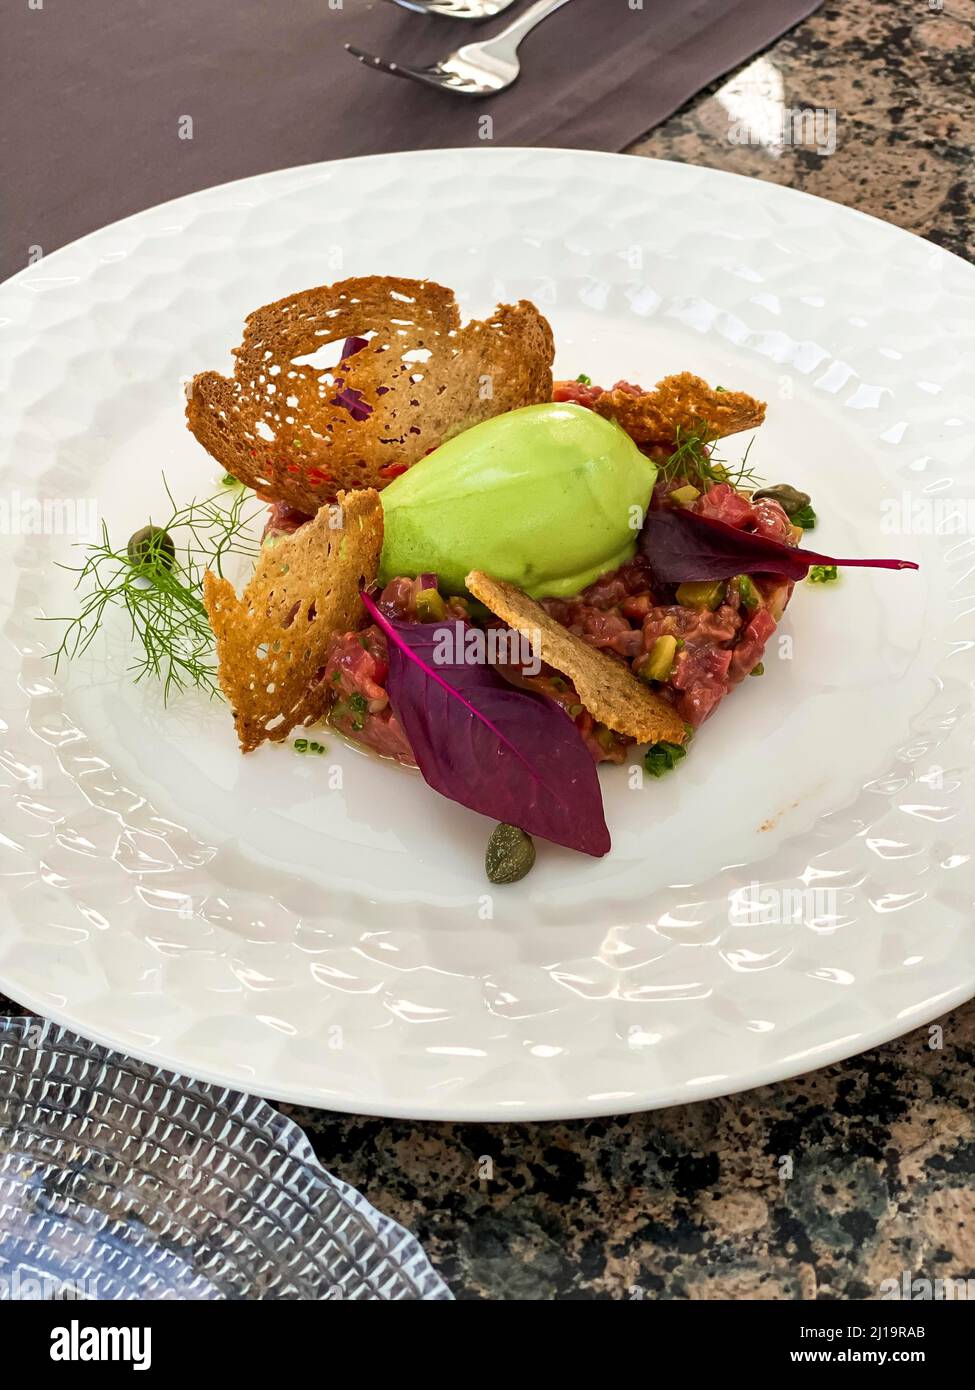 Avocado dip with toasted bread and salmon tartare Stock Photo